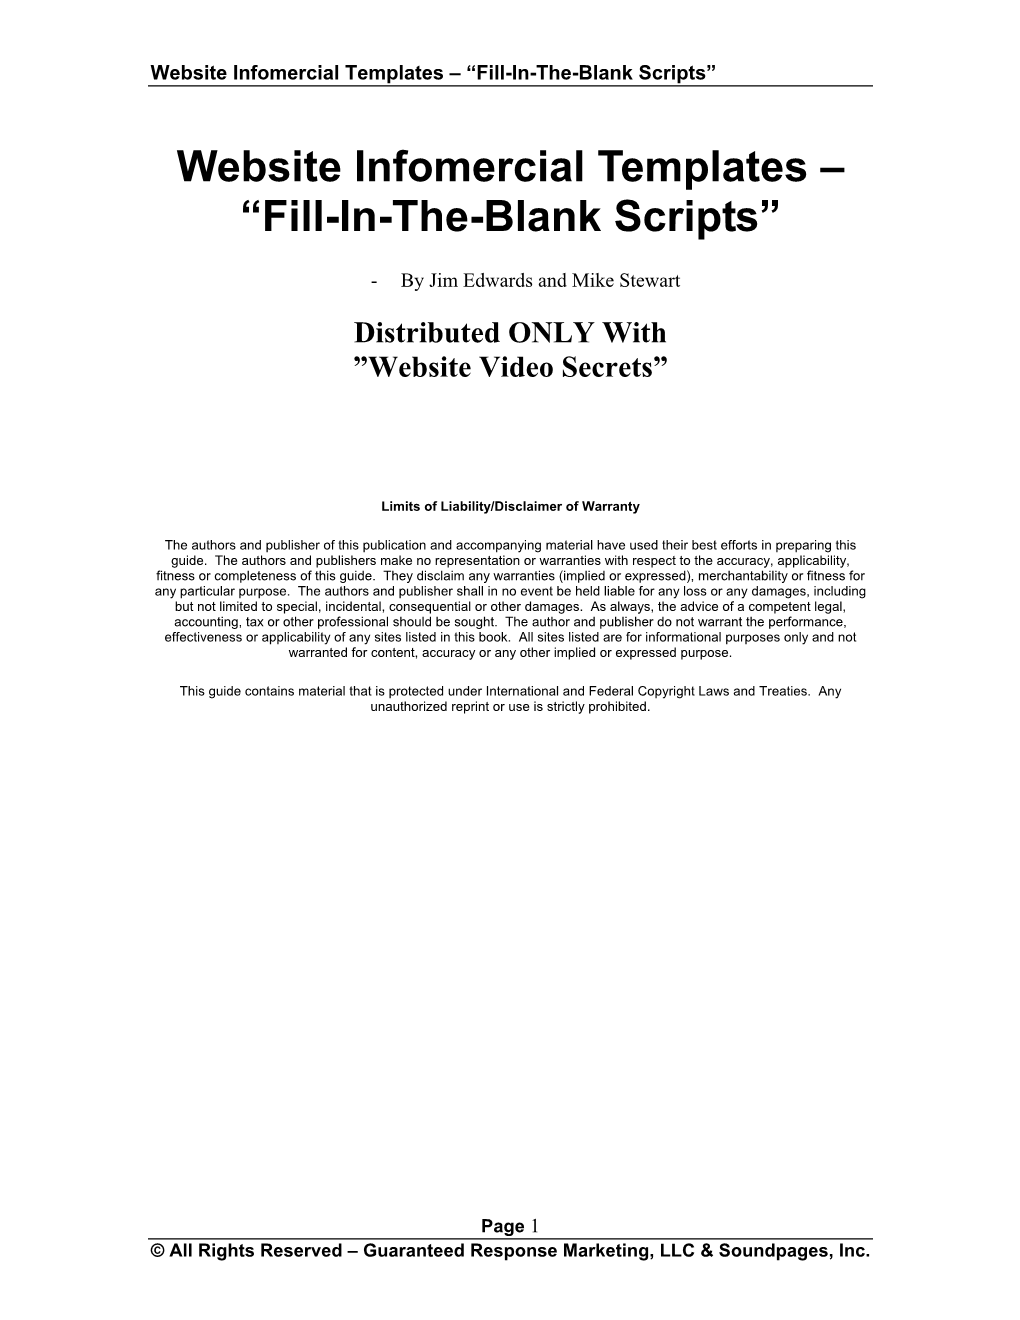 Website Infomercial Templates – “Fill-In-The-Blank Scripts”